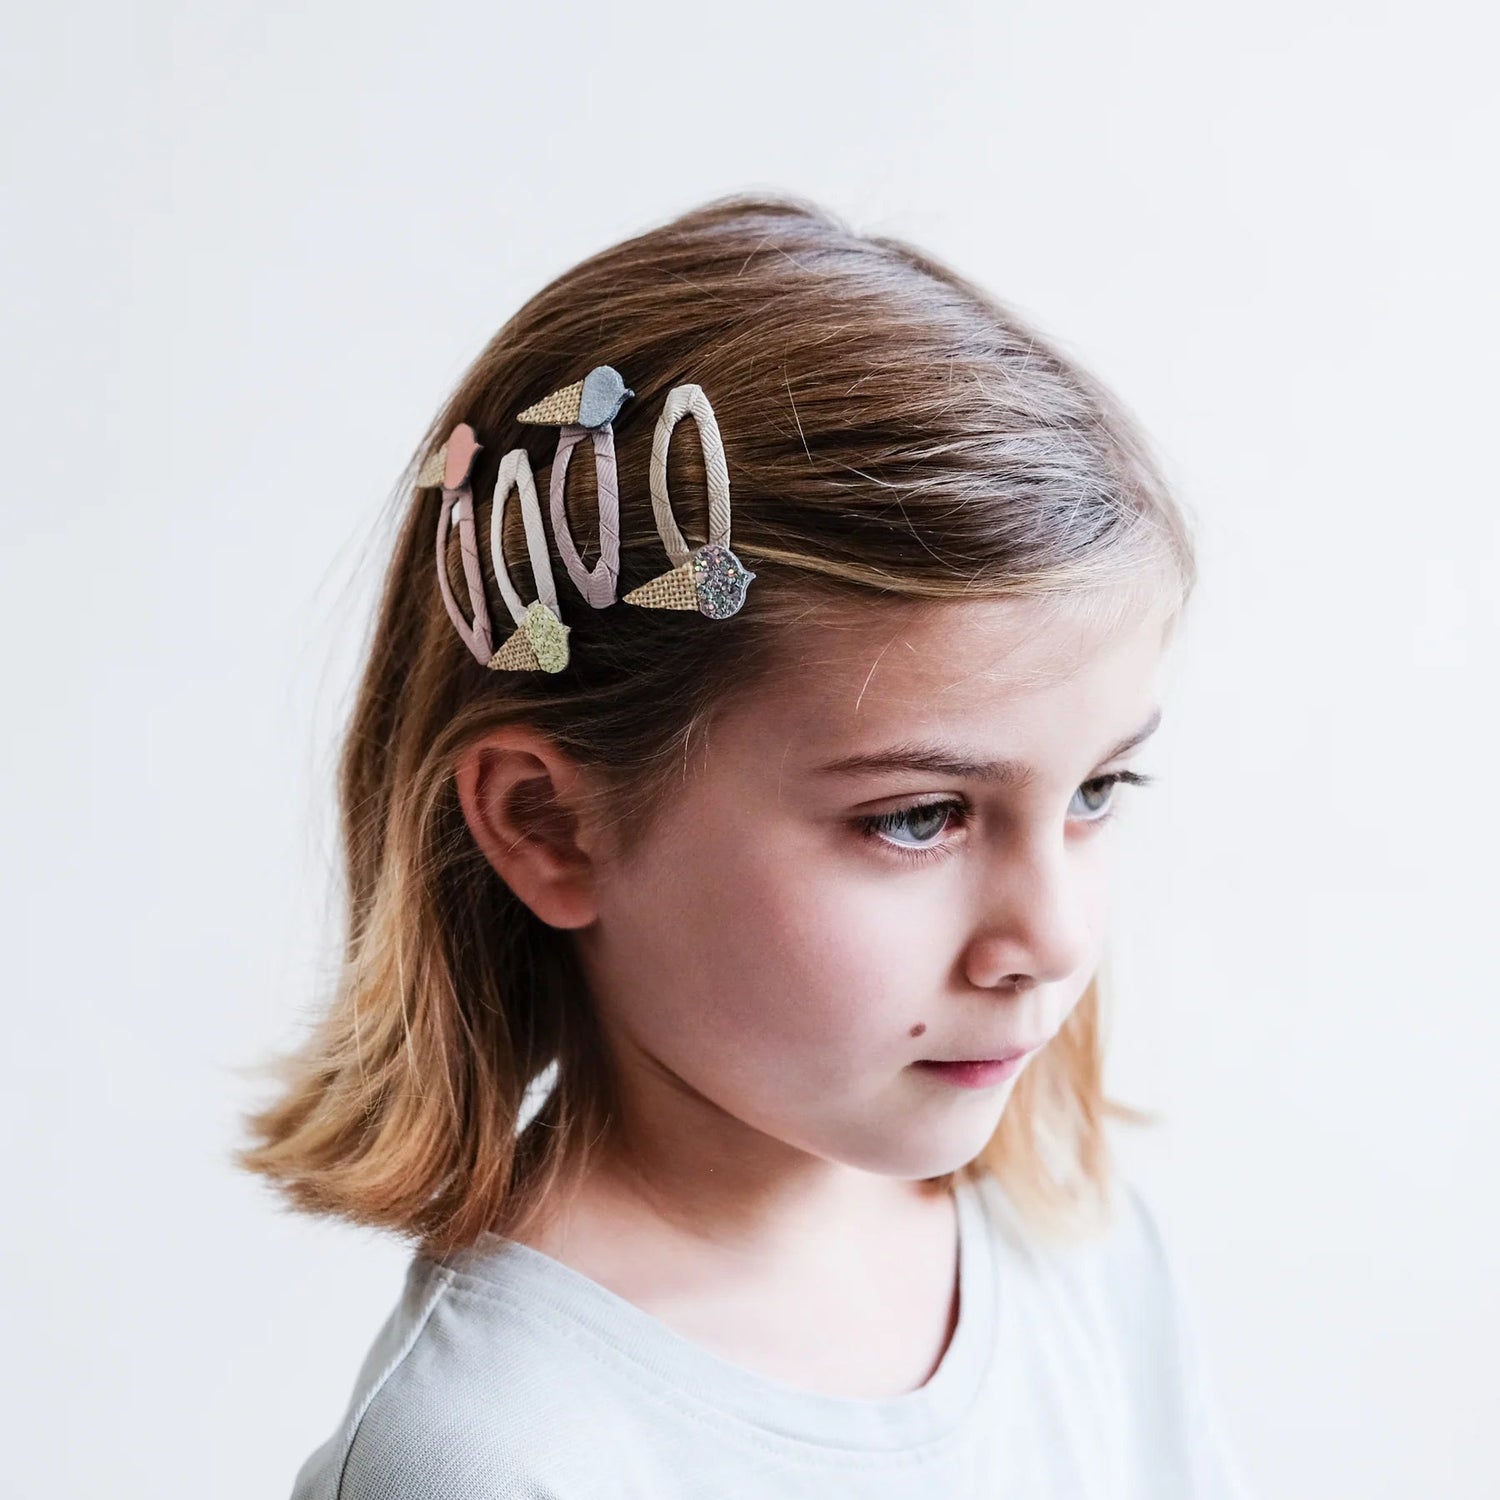 ICE-CREAM CLIC CLAC HAIR CLIPS by MIMI & LULA - The Playful Collective